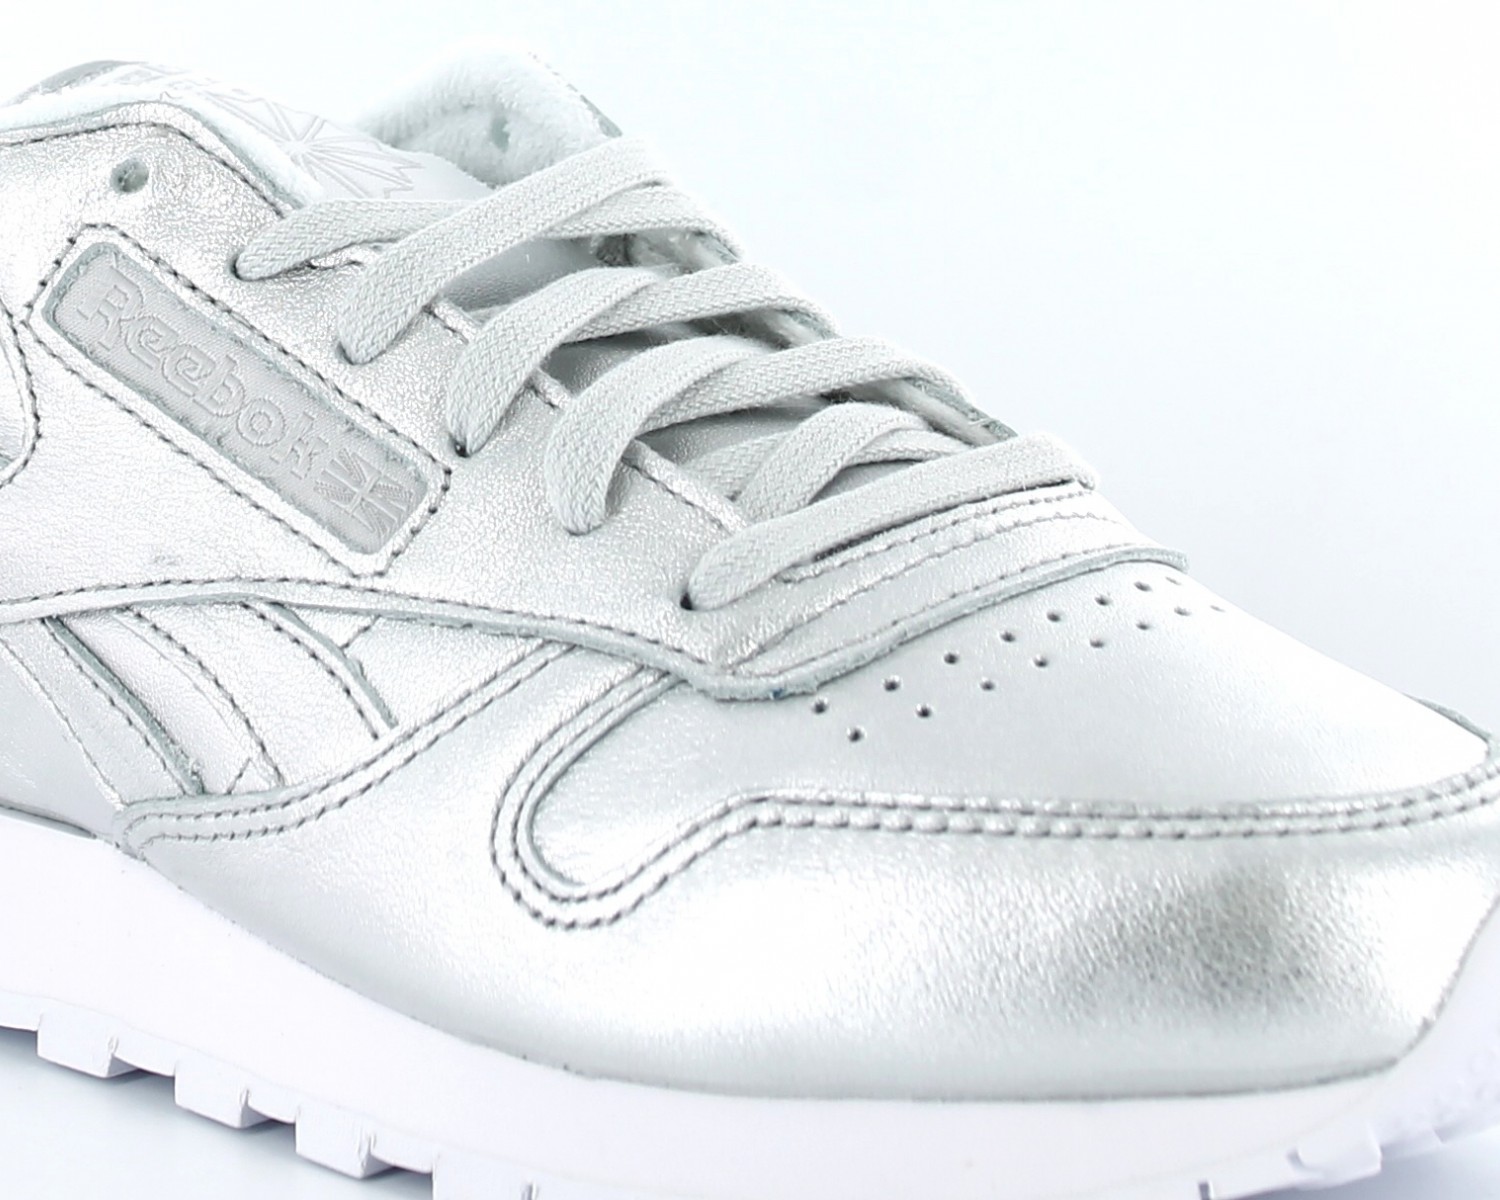 reebok classic leather argent